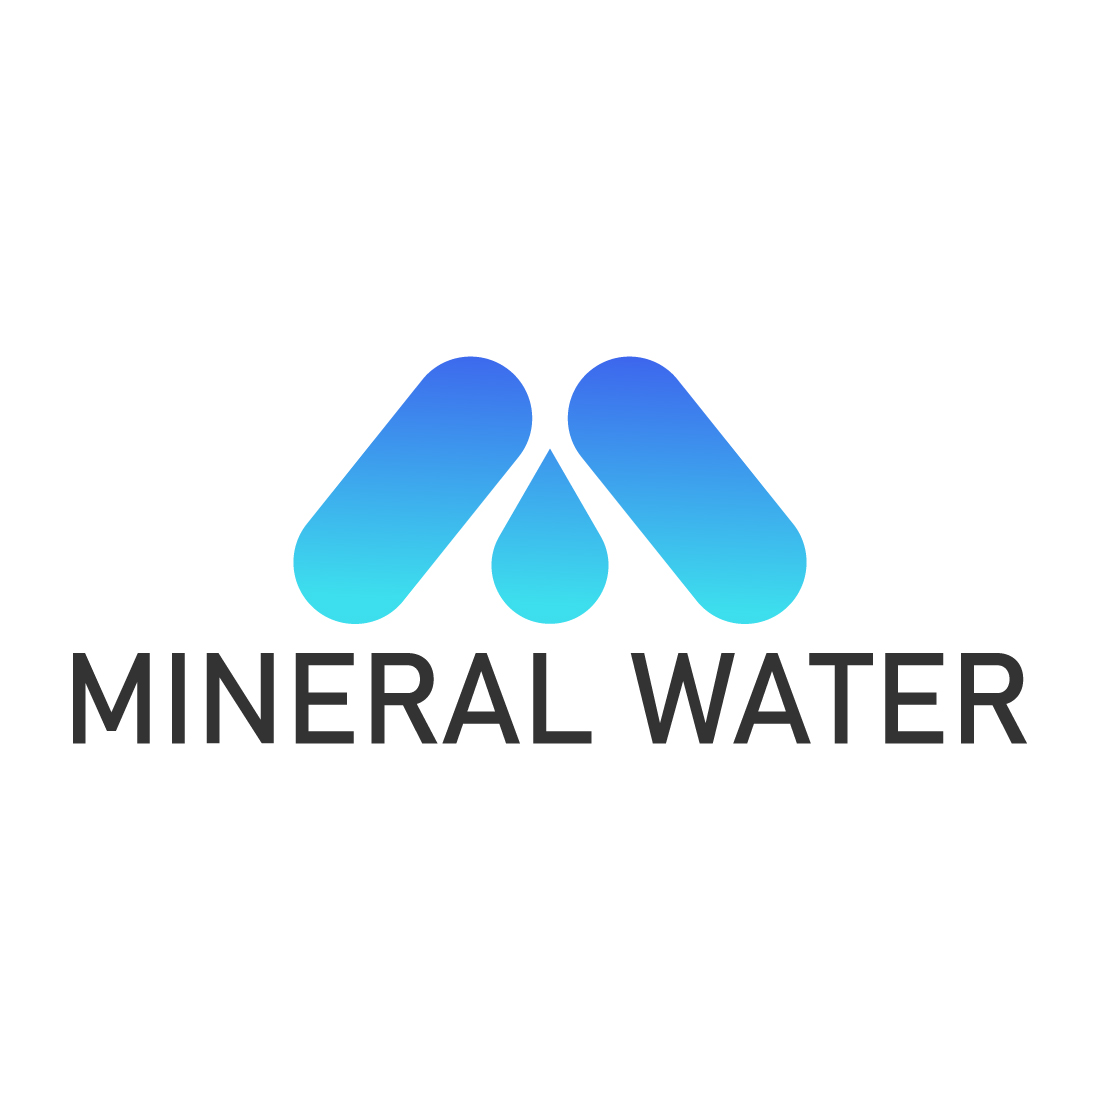 Mineral-water cover image.